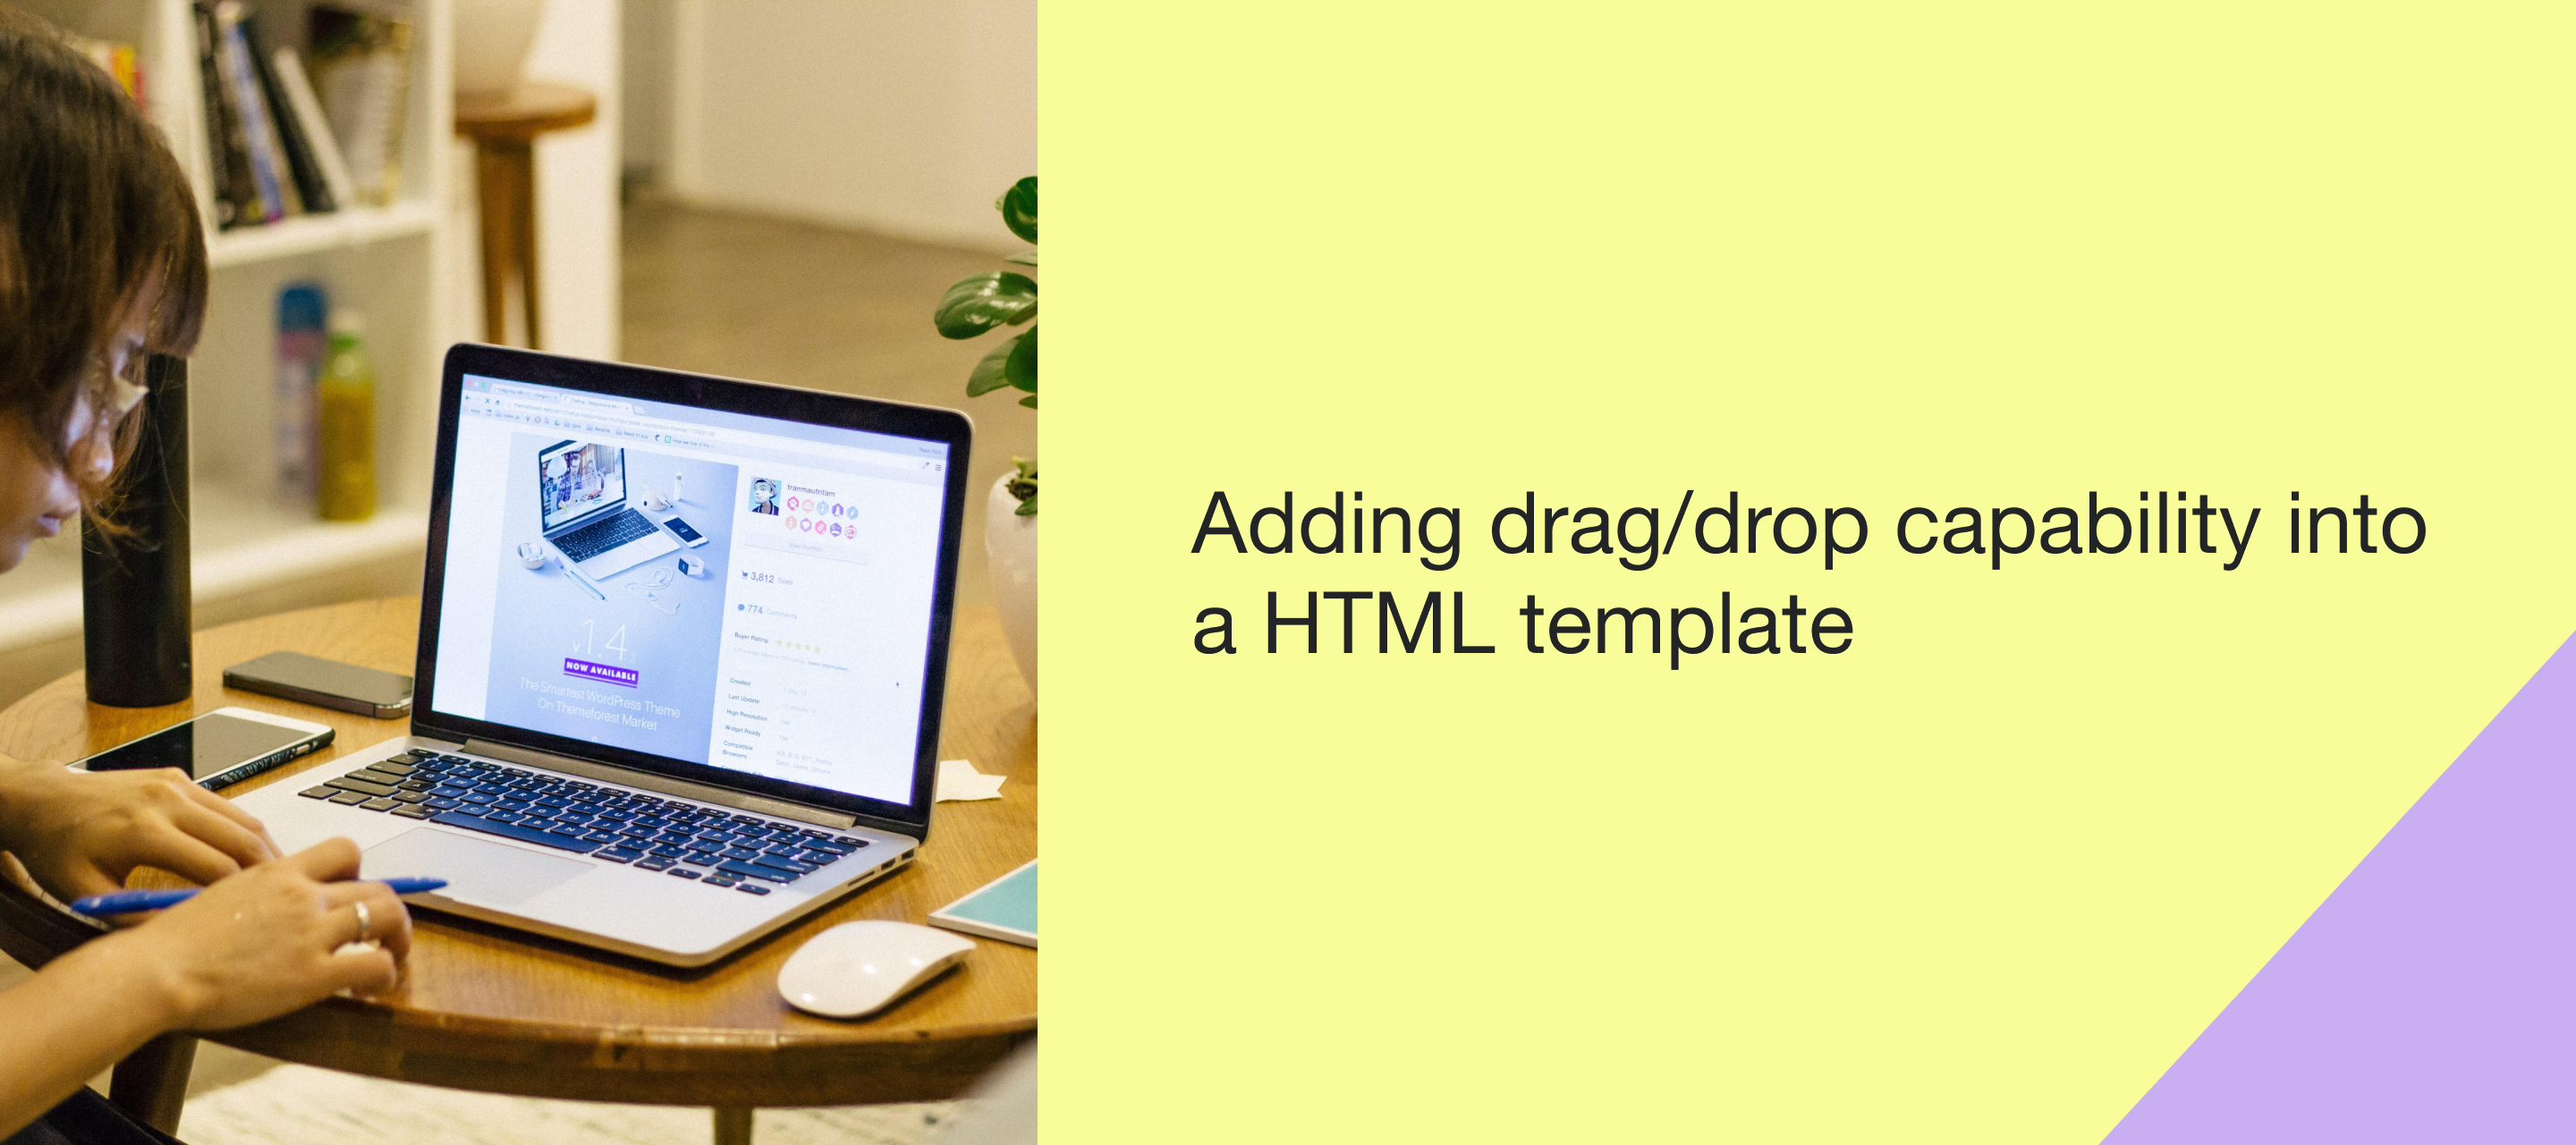 Adding drag/drop capability into a HTML template